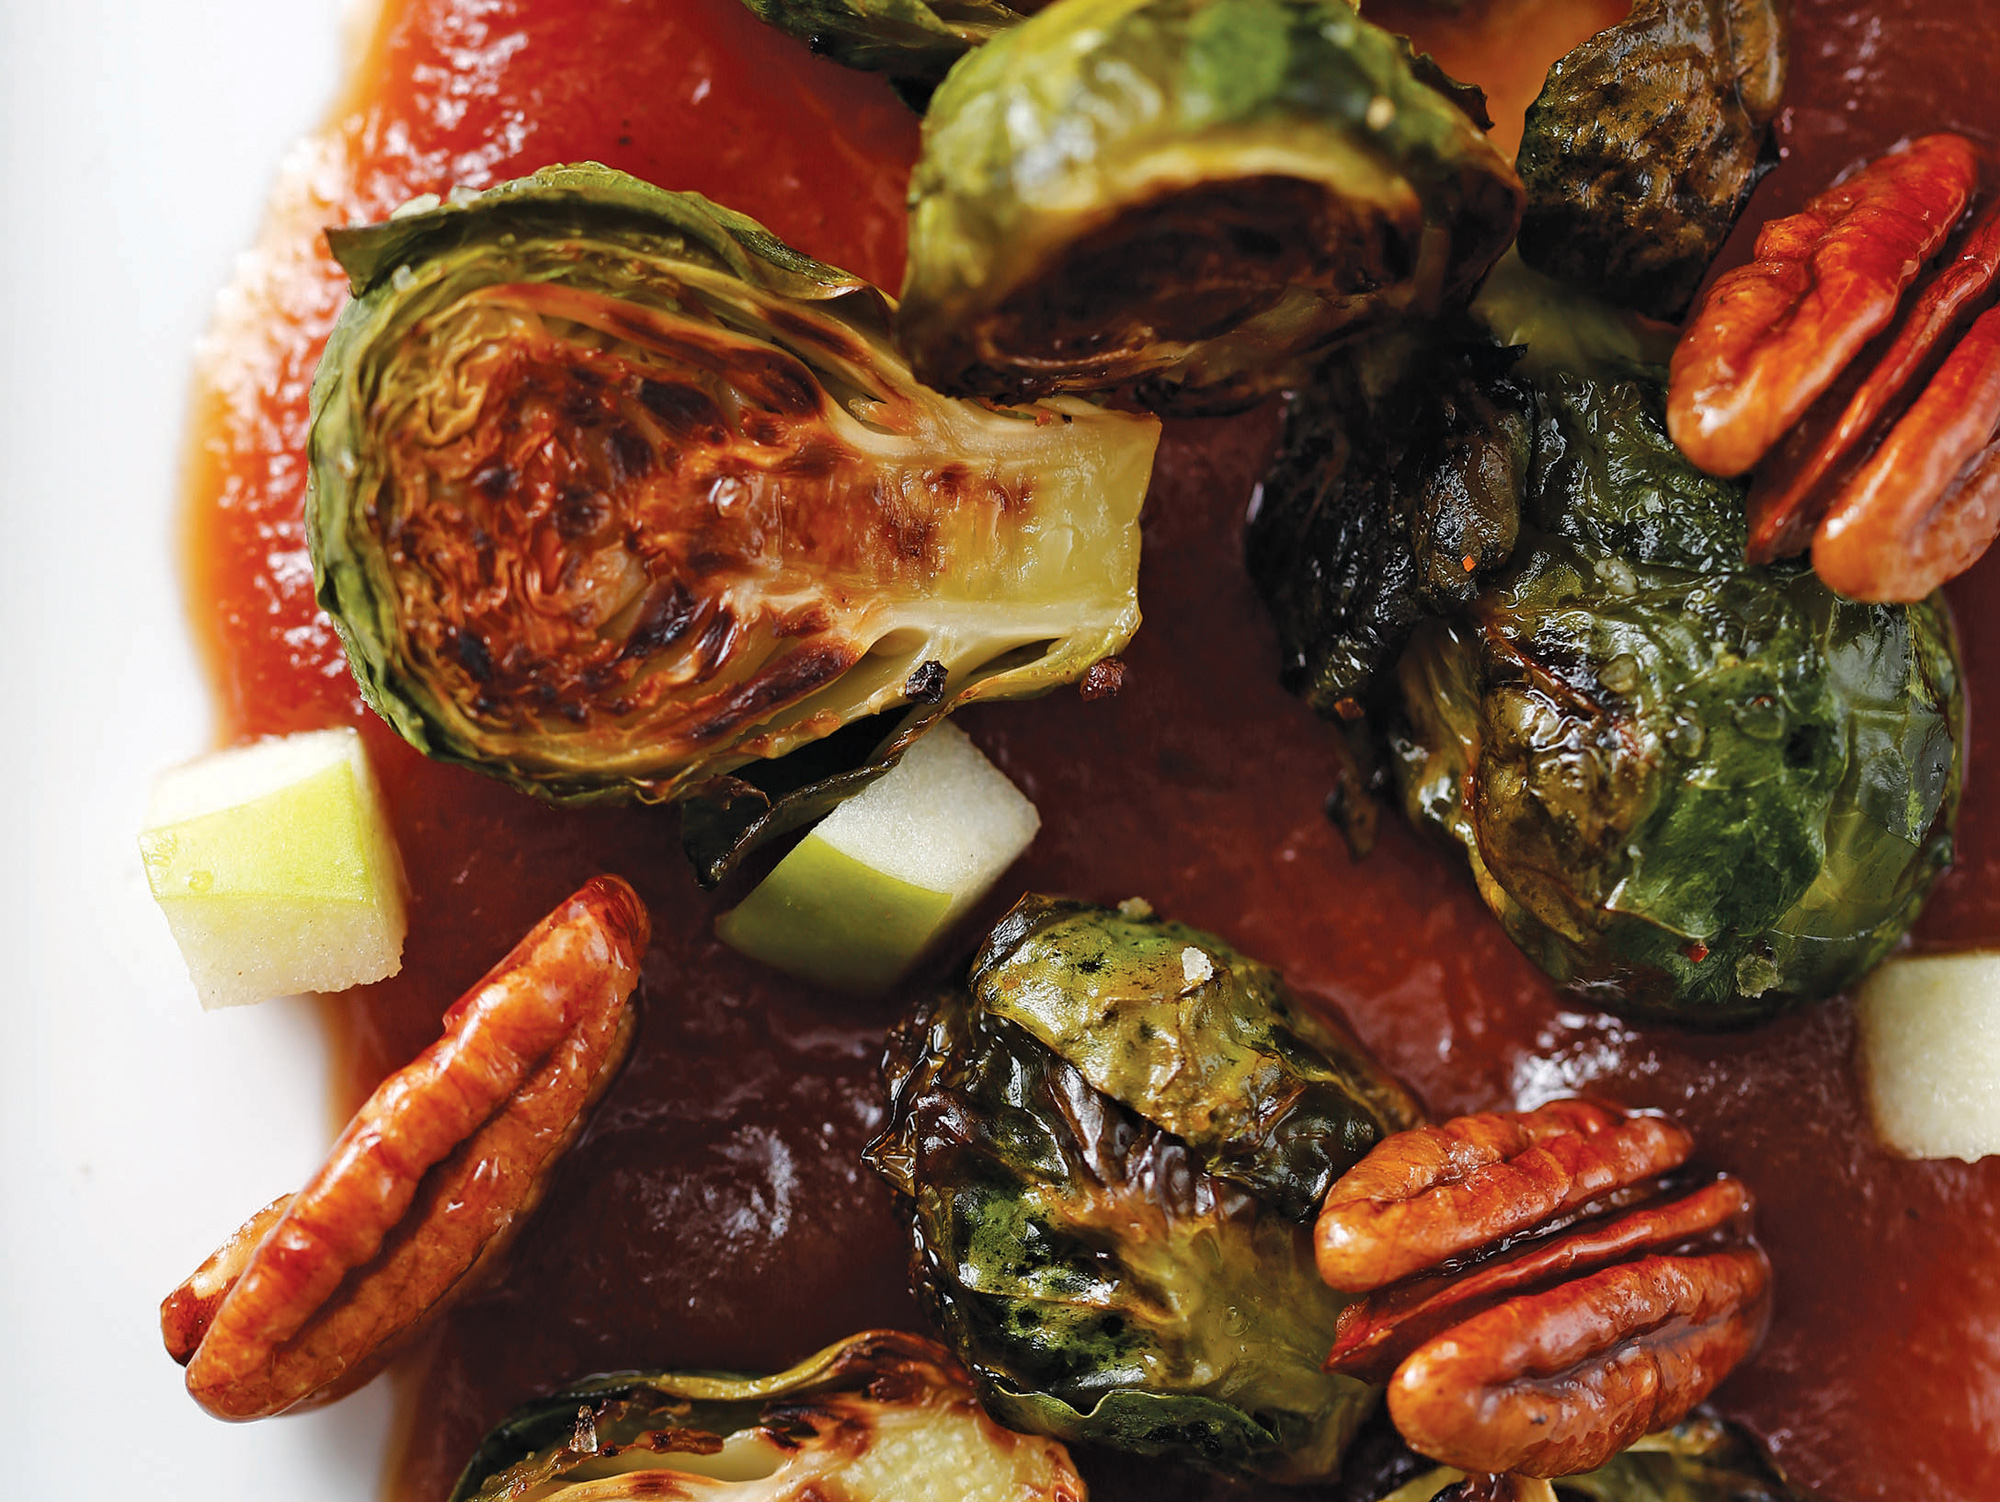 Apples and crunchy sweet pecans perk up baked Brussels sprouts.